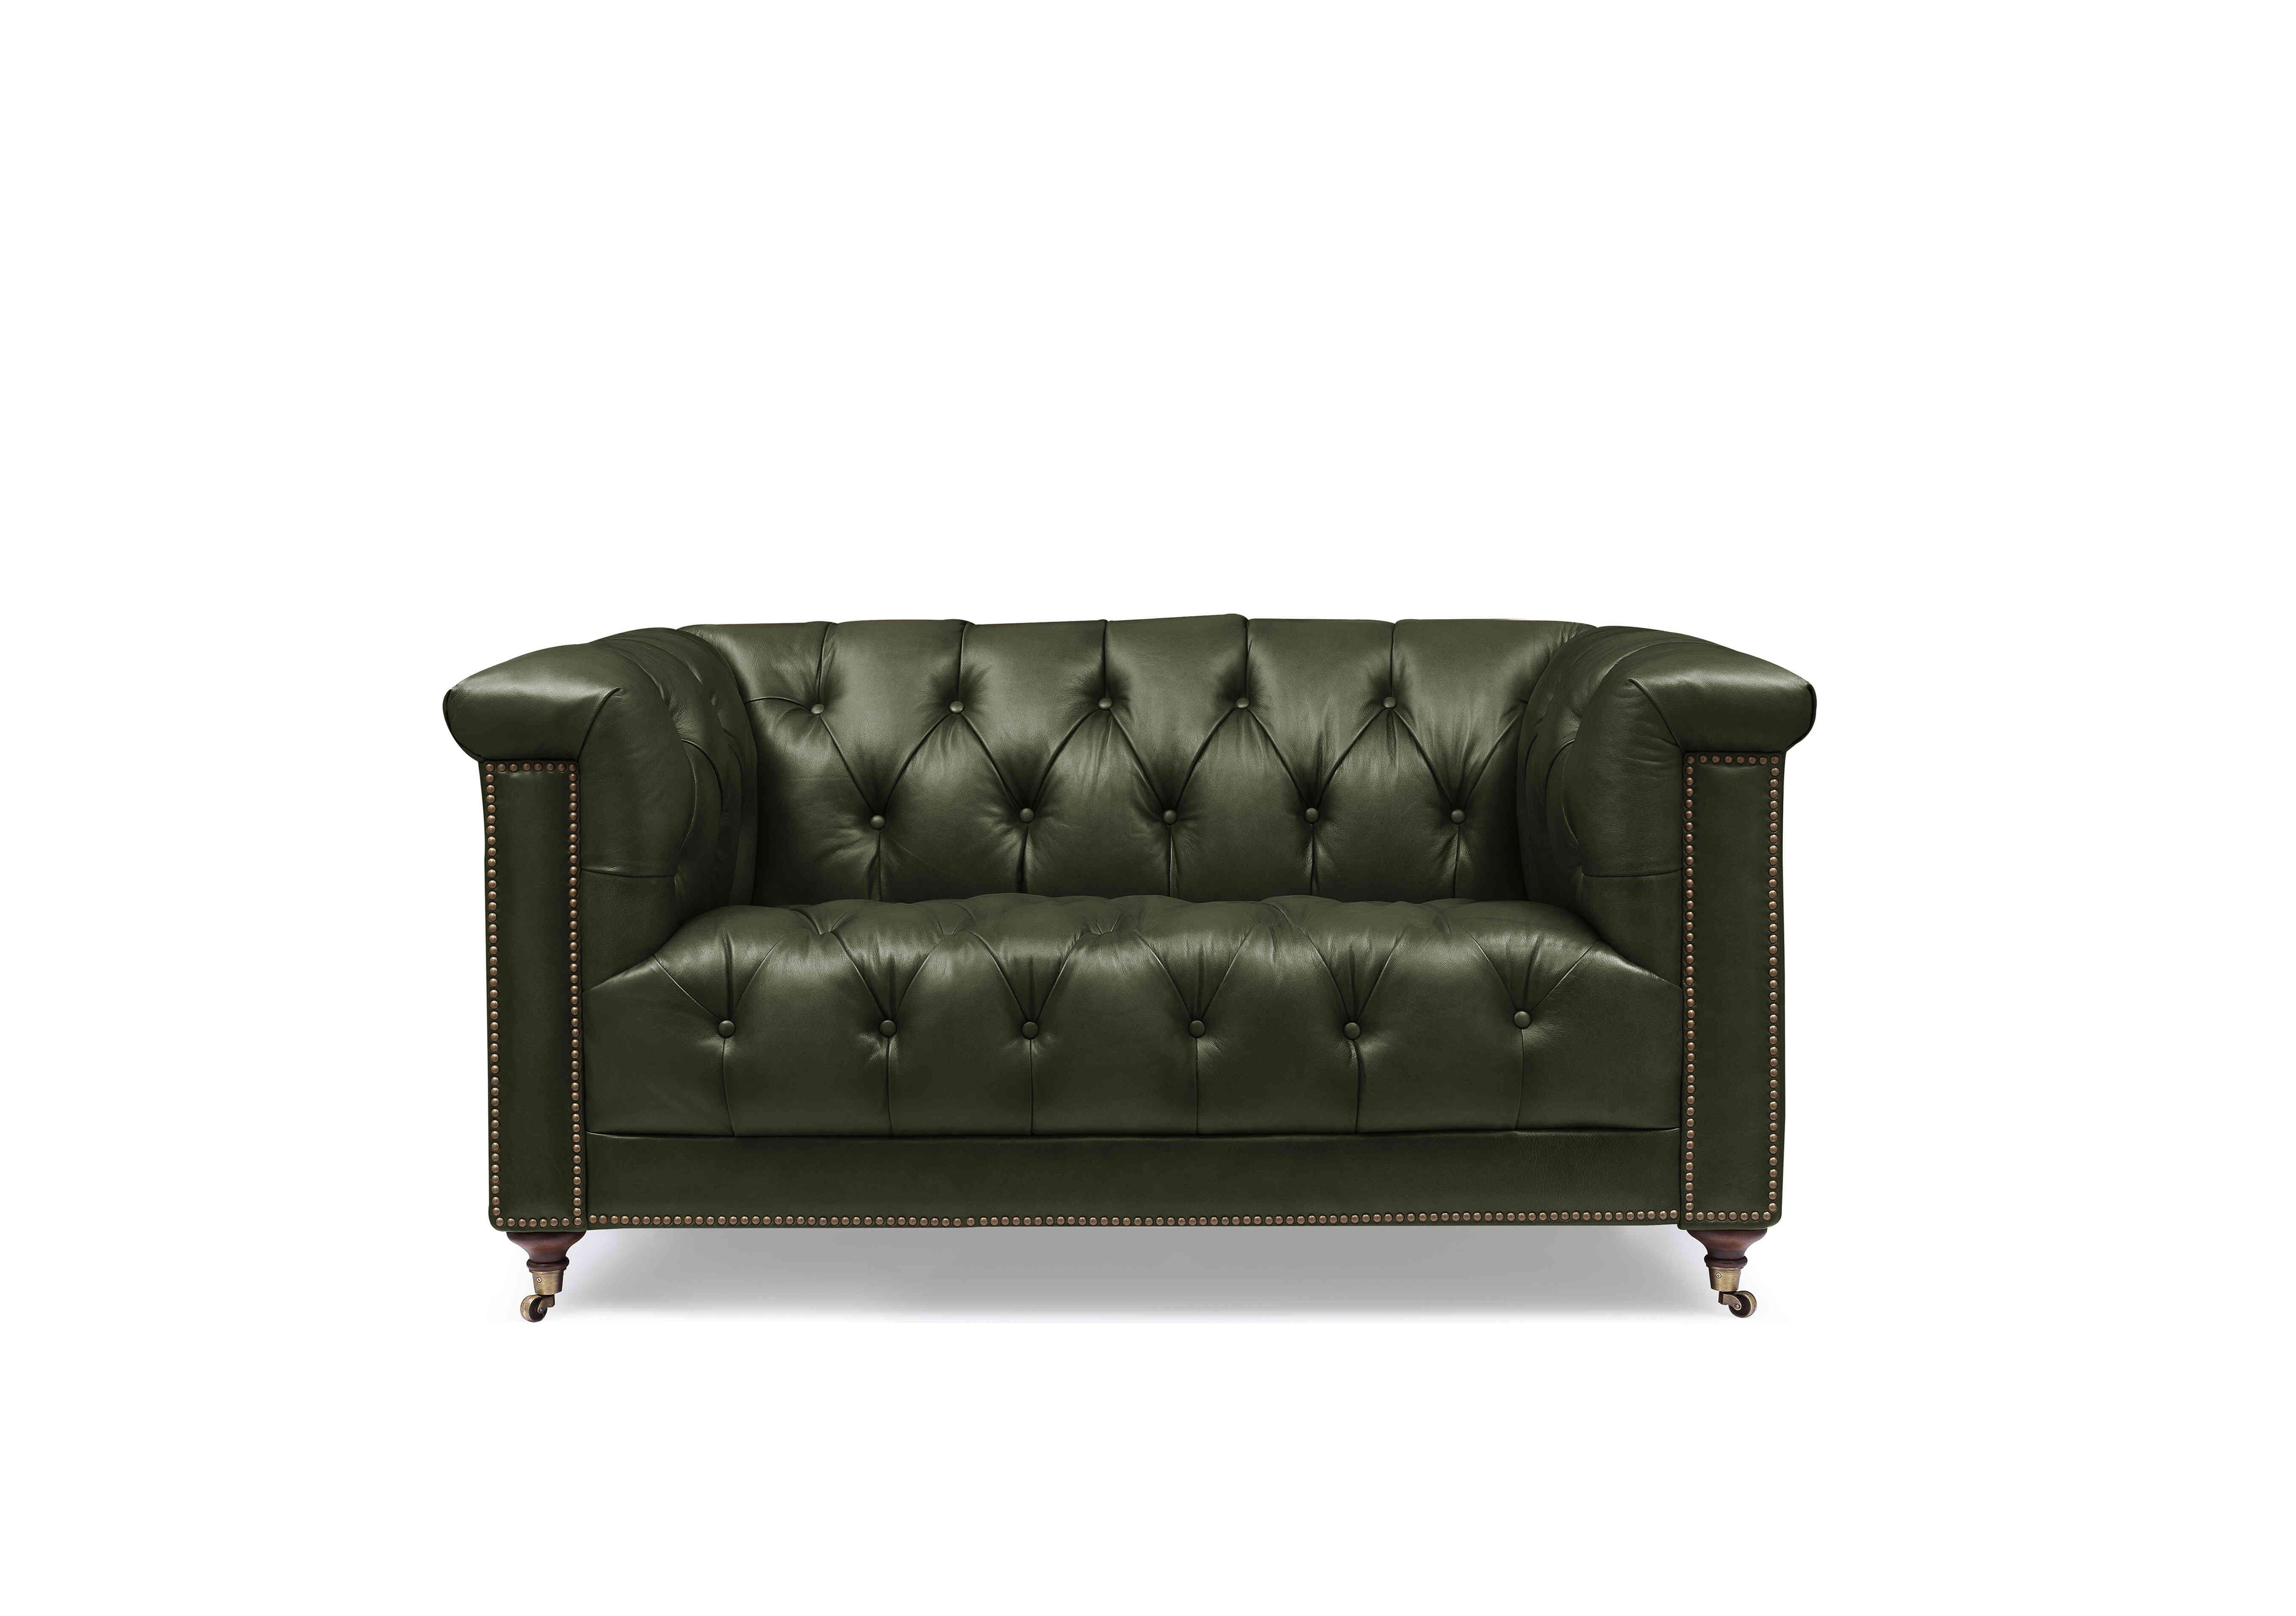 Wallace 2 Seater Leather Chesterfield Sofa in X3y1-1965ls Emerald on Furniture Village